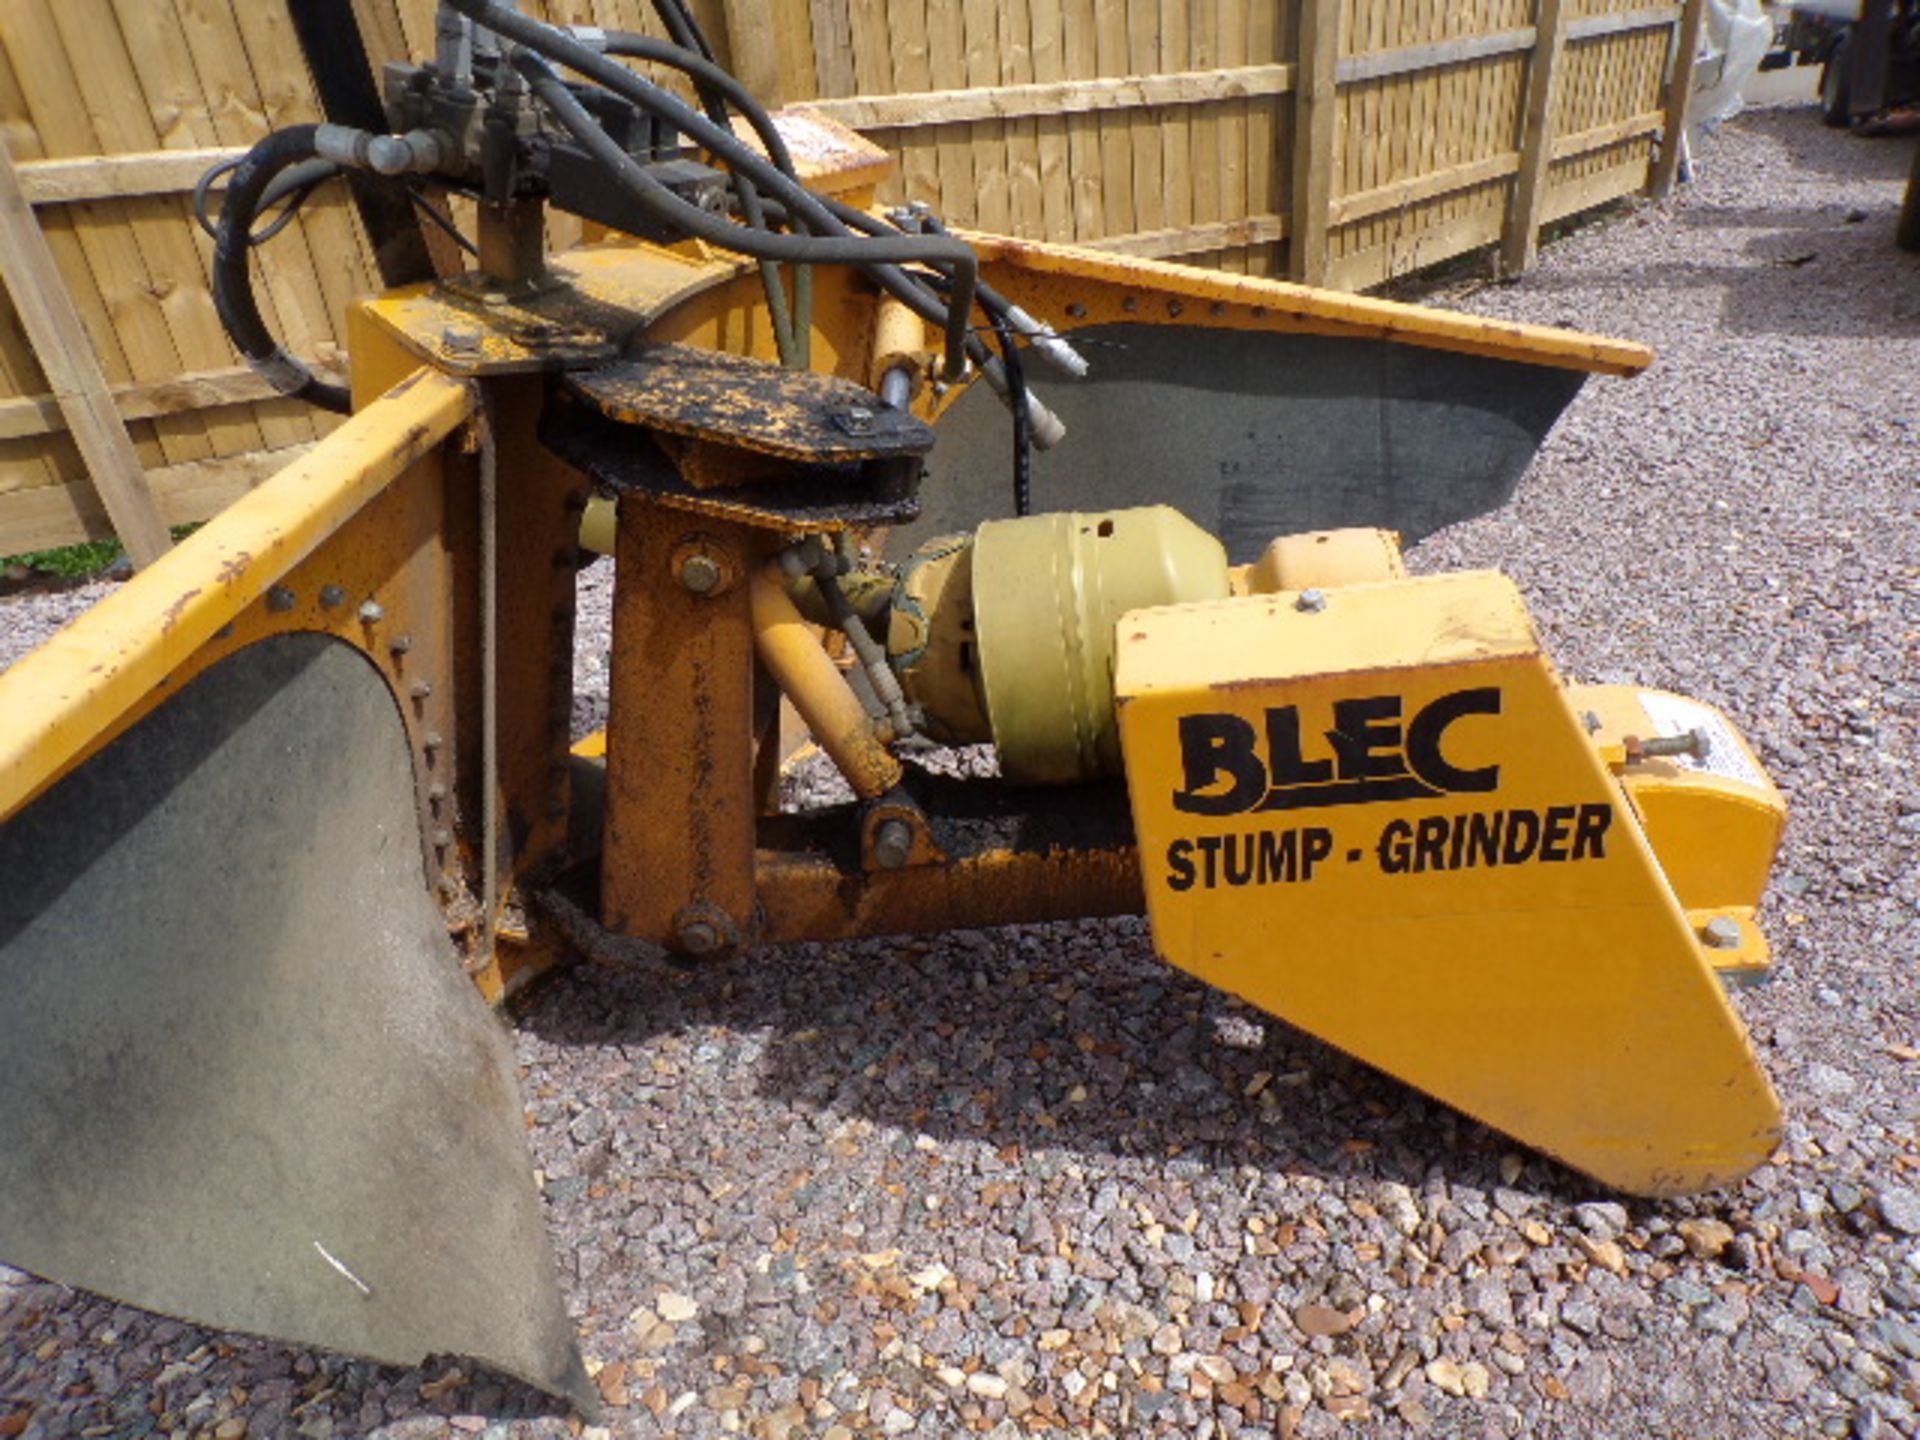 BLEC SG100 STUMP GRINDER - POWERFUL PTO DRIVEN GRINDING WHEEL, - Image 2 of 5